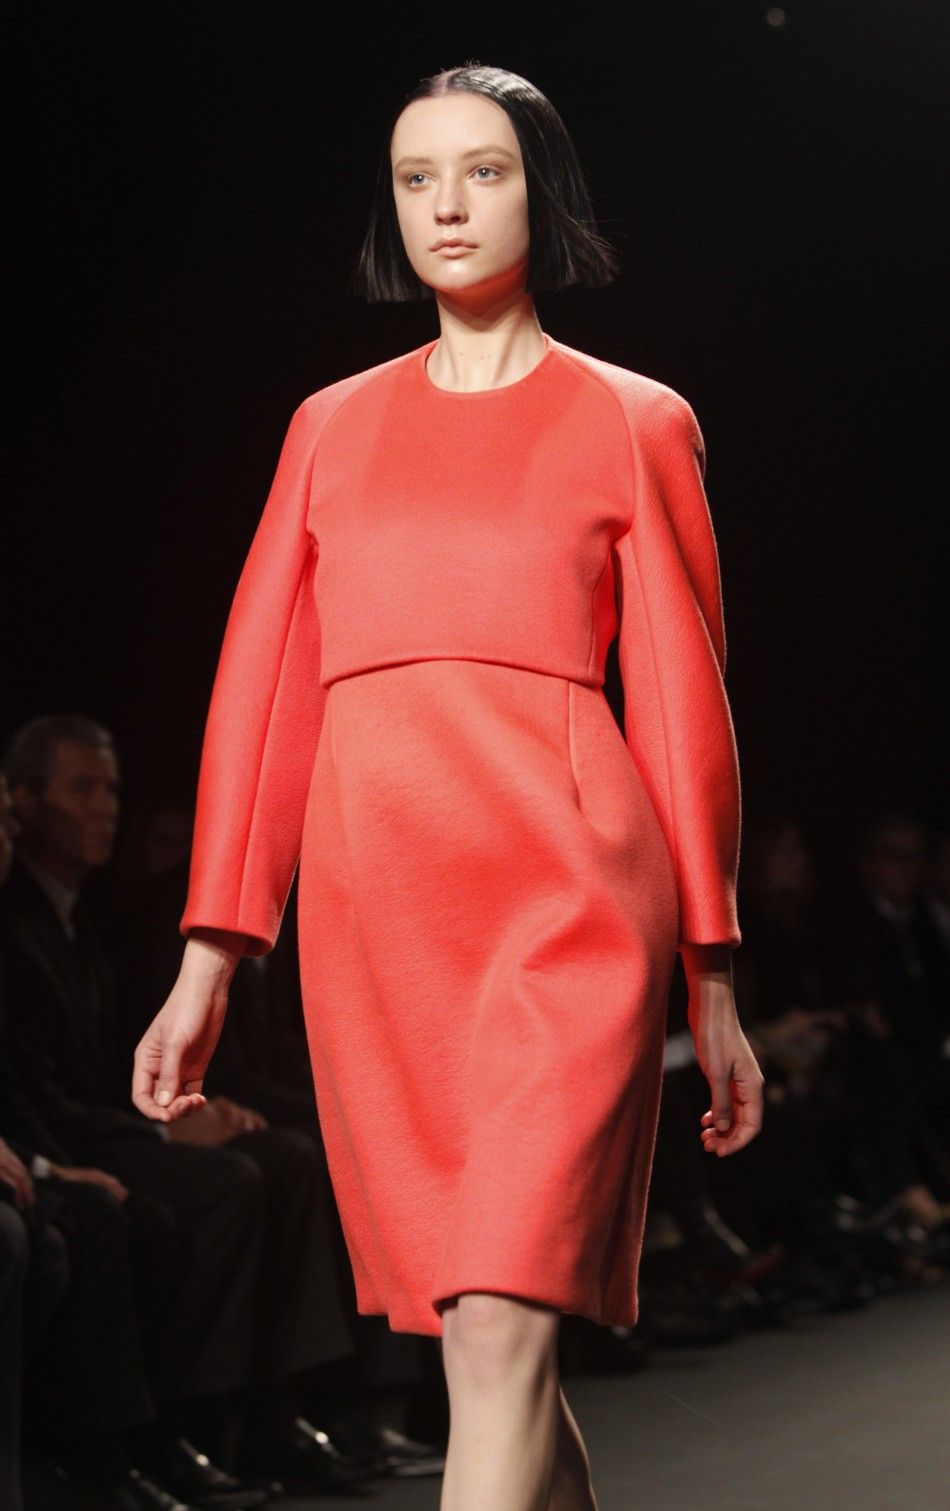 Calvin Klein Opts for Neutral and Monochromatic Hues at 2012 New York Fashion Week